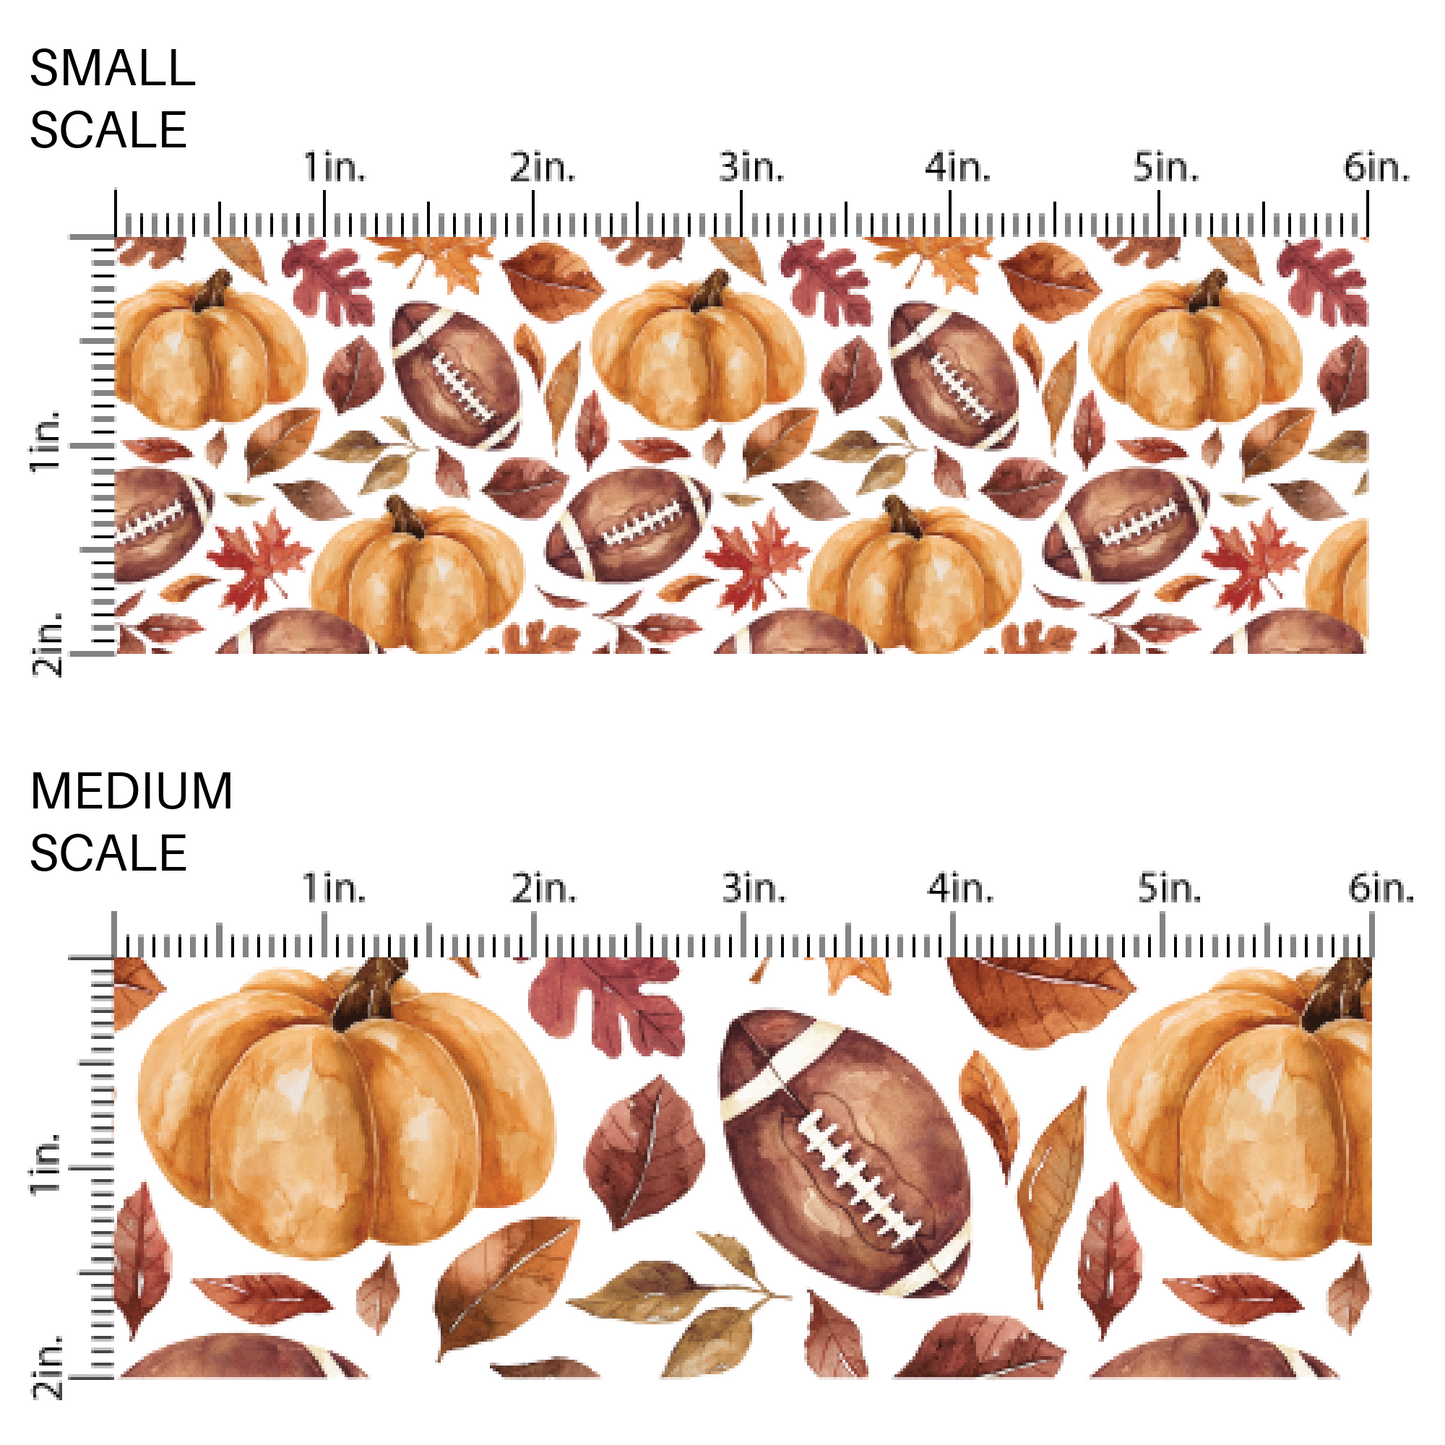 Football themed high quality fabric adaptable for all your crafting needs. Make cute baby headwraps, fun girl hairbows, knotted headbands for adults or kids, clothing, and more!